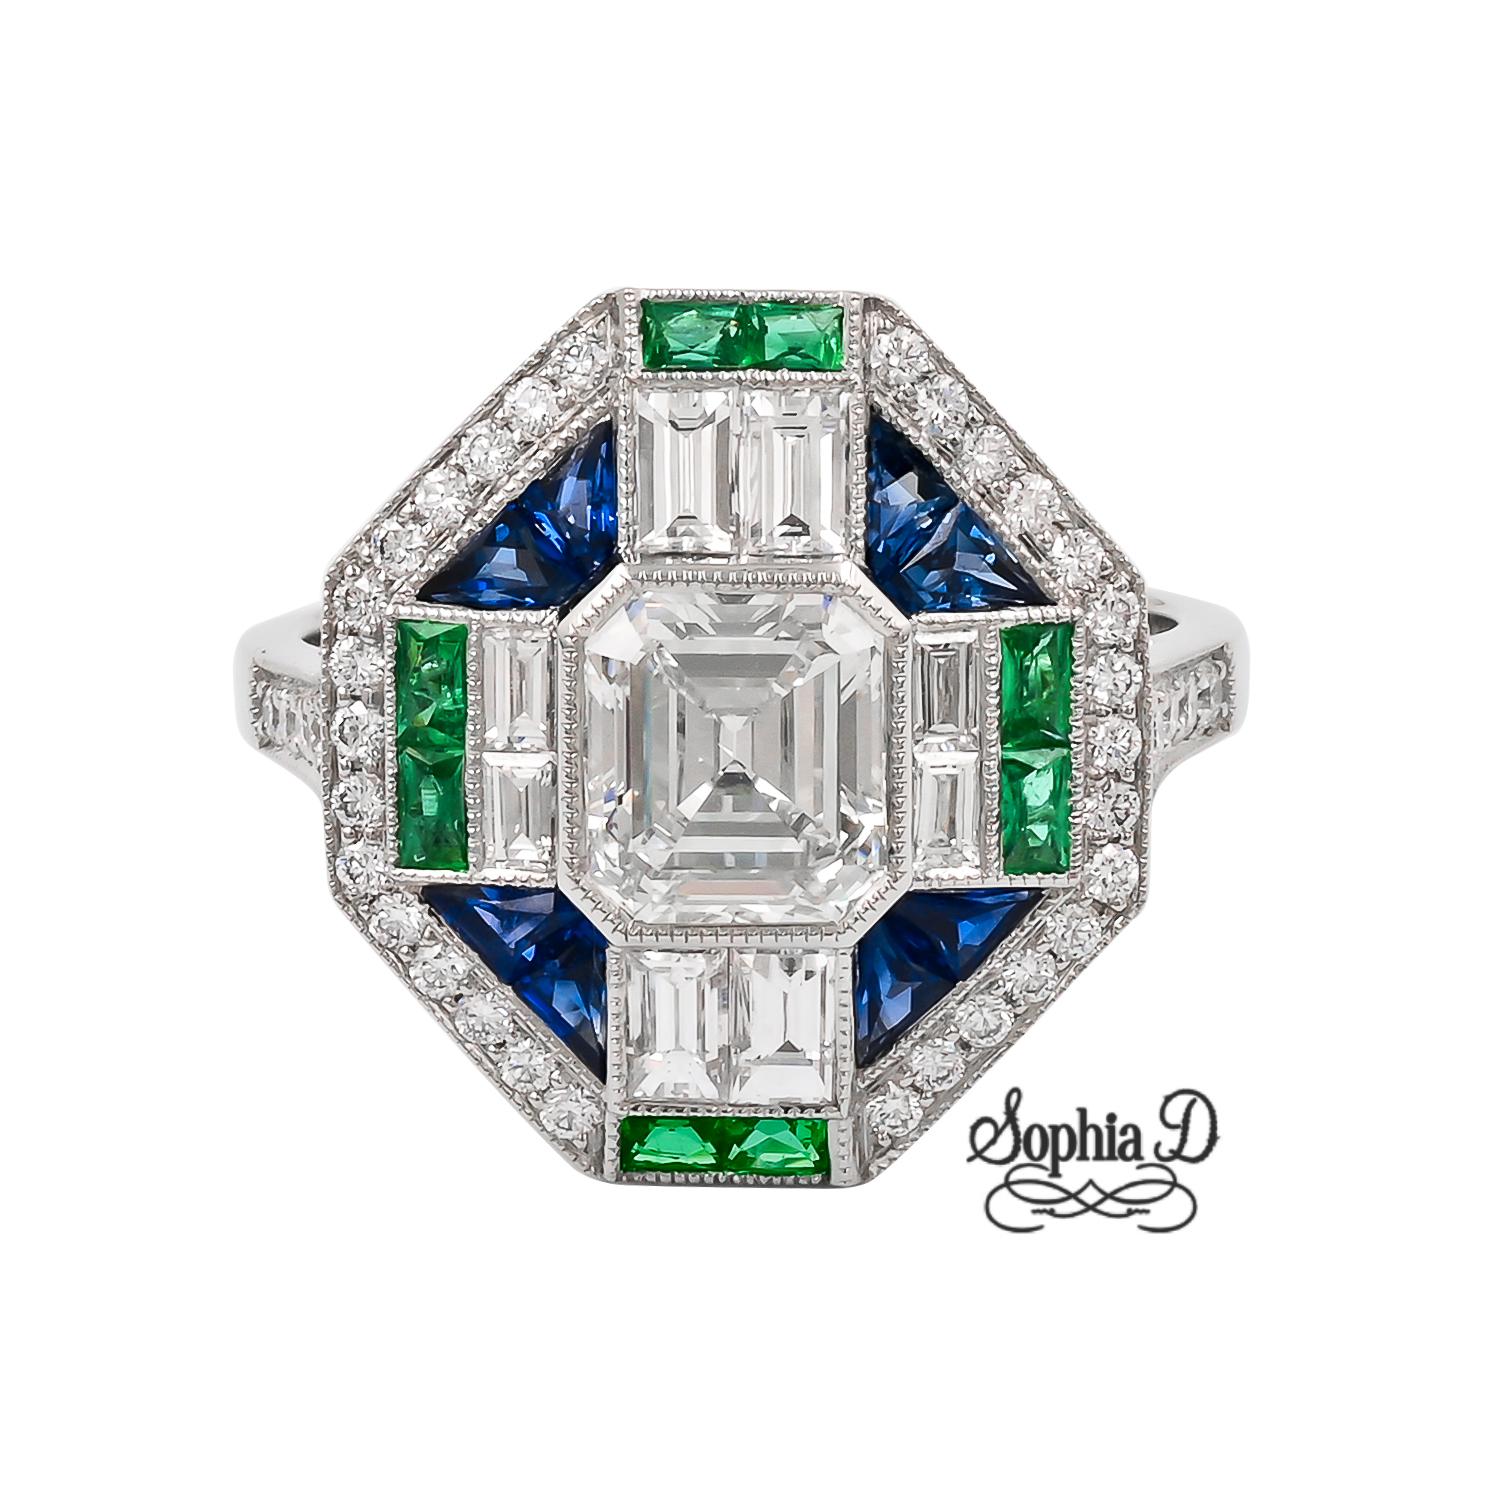 Three gems Art Deco ring by Sophia D. Set in platinum, the ring features a cushion cut center diamond that weighs approximately 1.15 carats with 0.09 carats emerald and 0.46 carats sapphires. 

The ring is a size 6.5 and is resizable and stamped